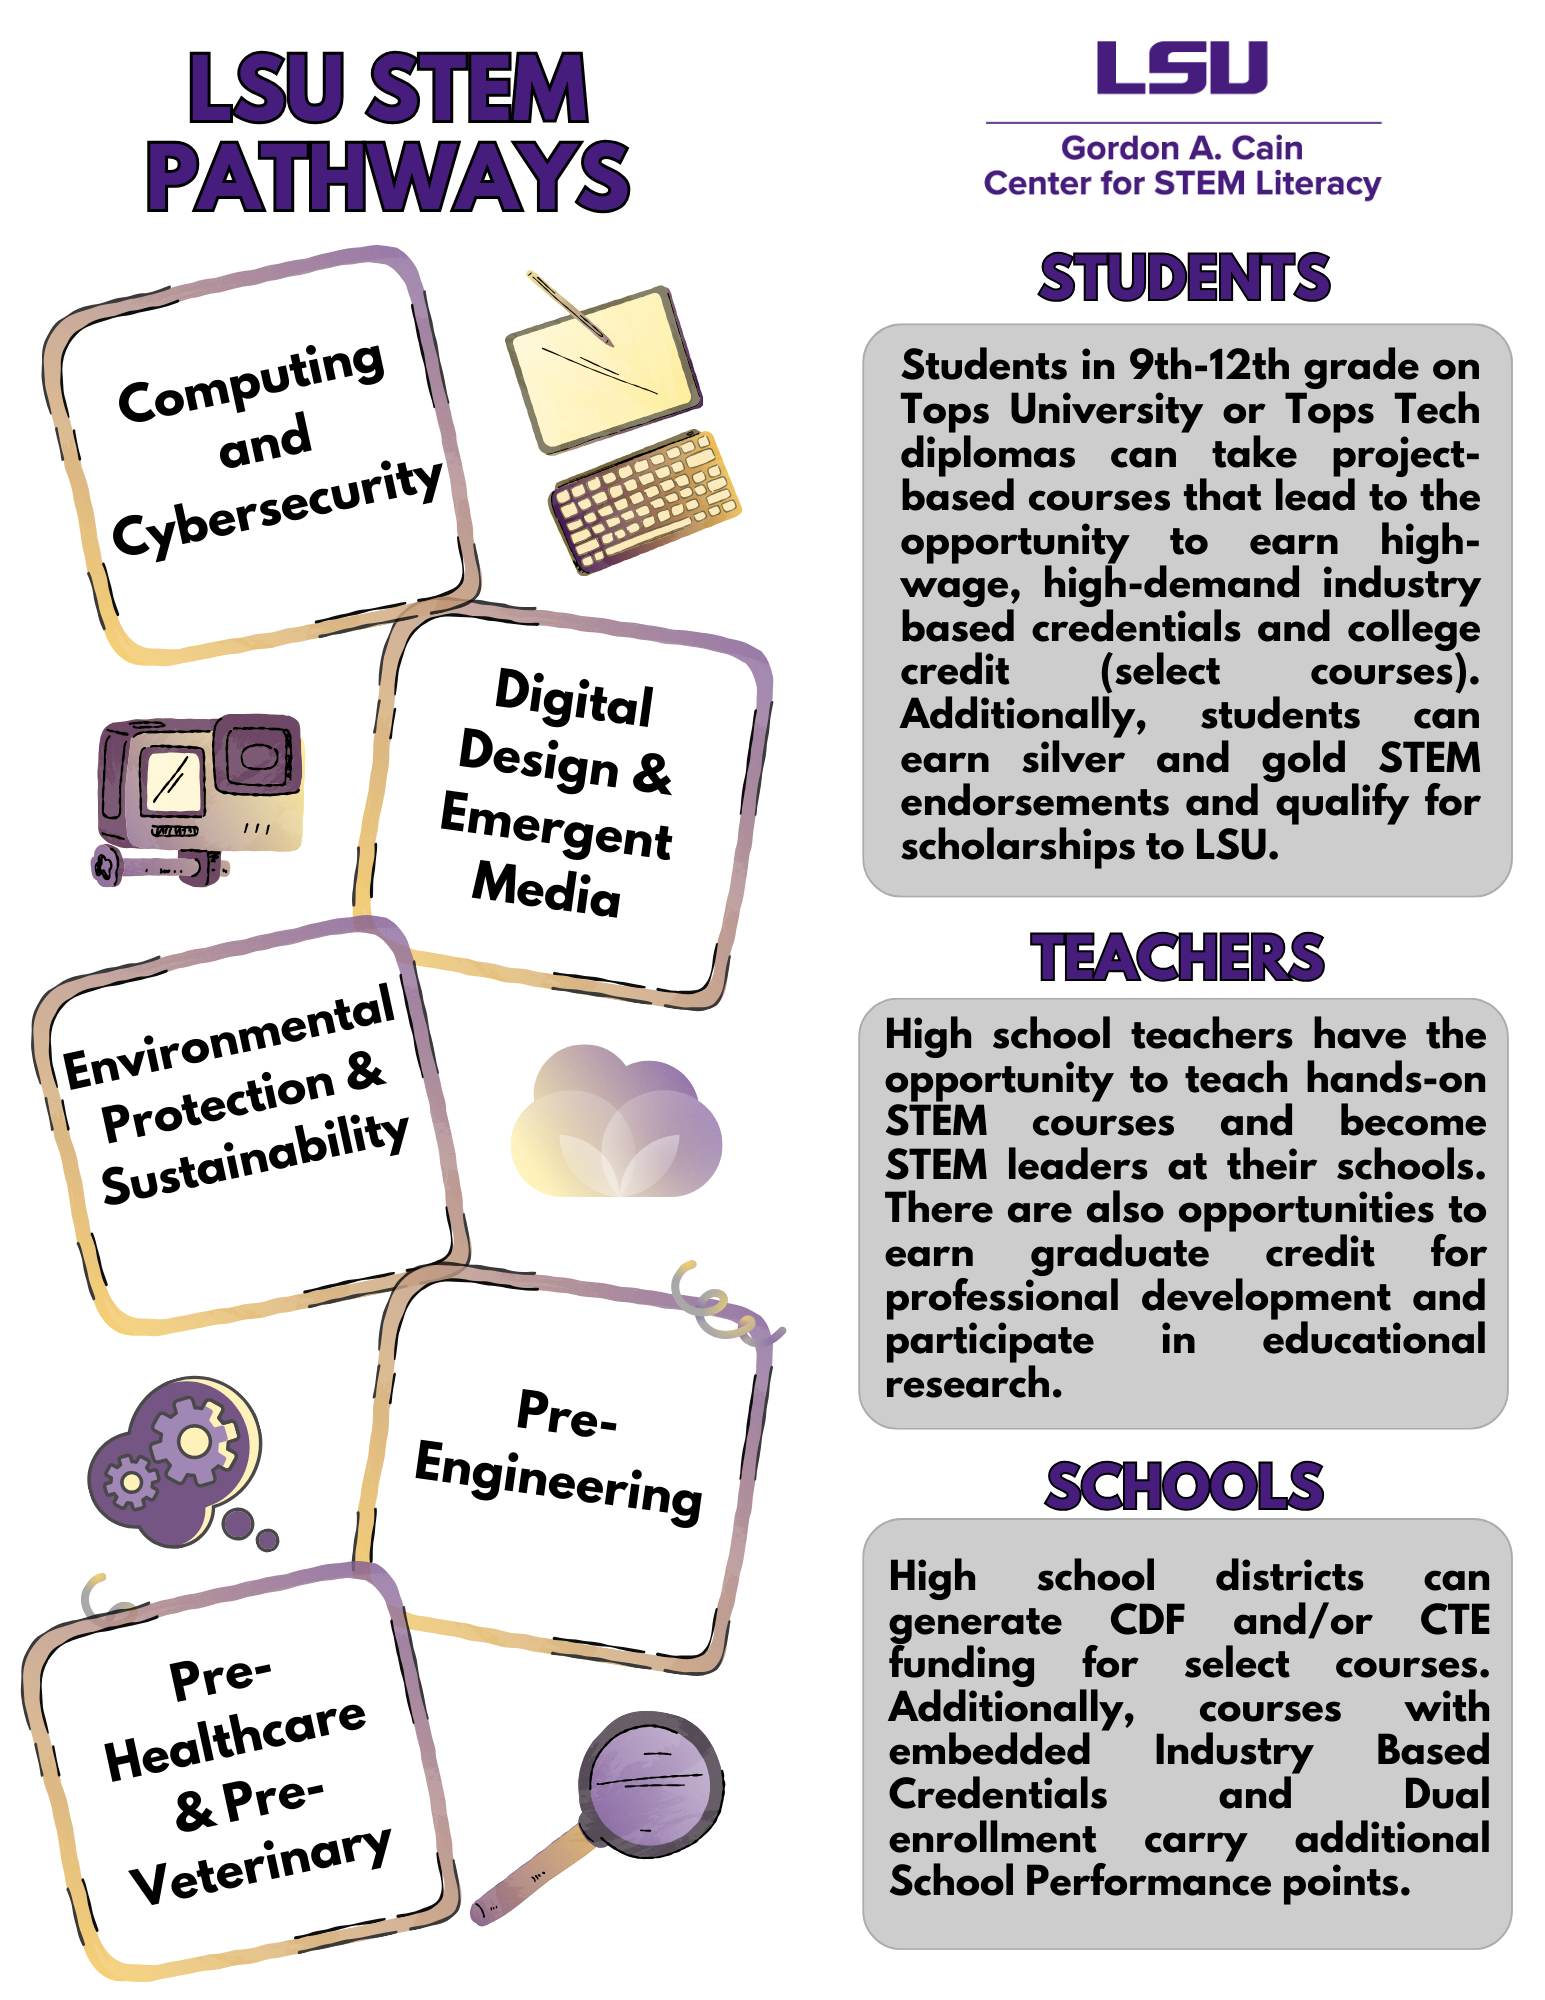 LSU Pathways offers 5 tracks: Computing and Cybersecurity, Digital Design and Emergent Media, Environmental Protection and Sustainability, Pre-Engineering, and Pre-Healthcare and Pre-Veterinary